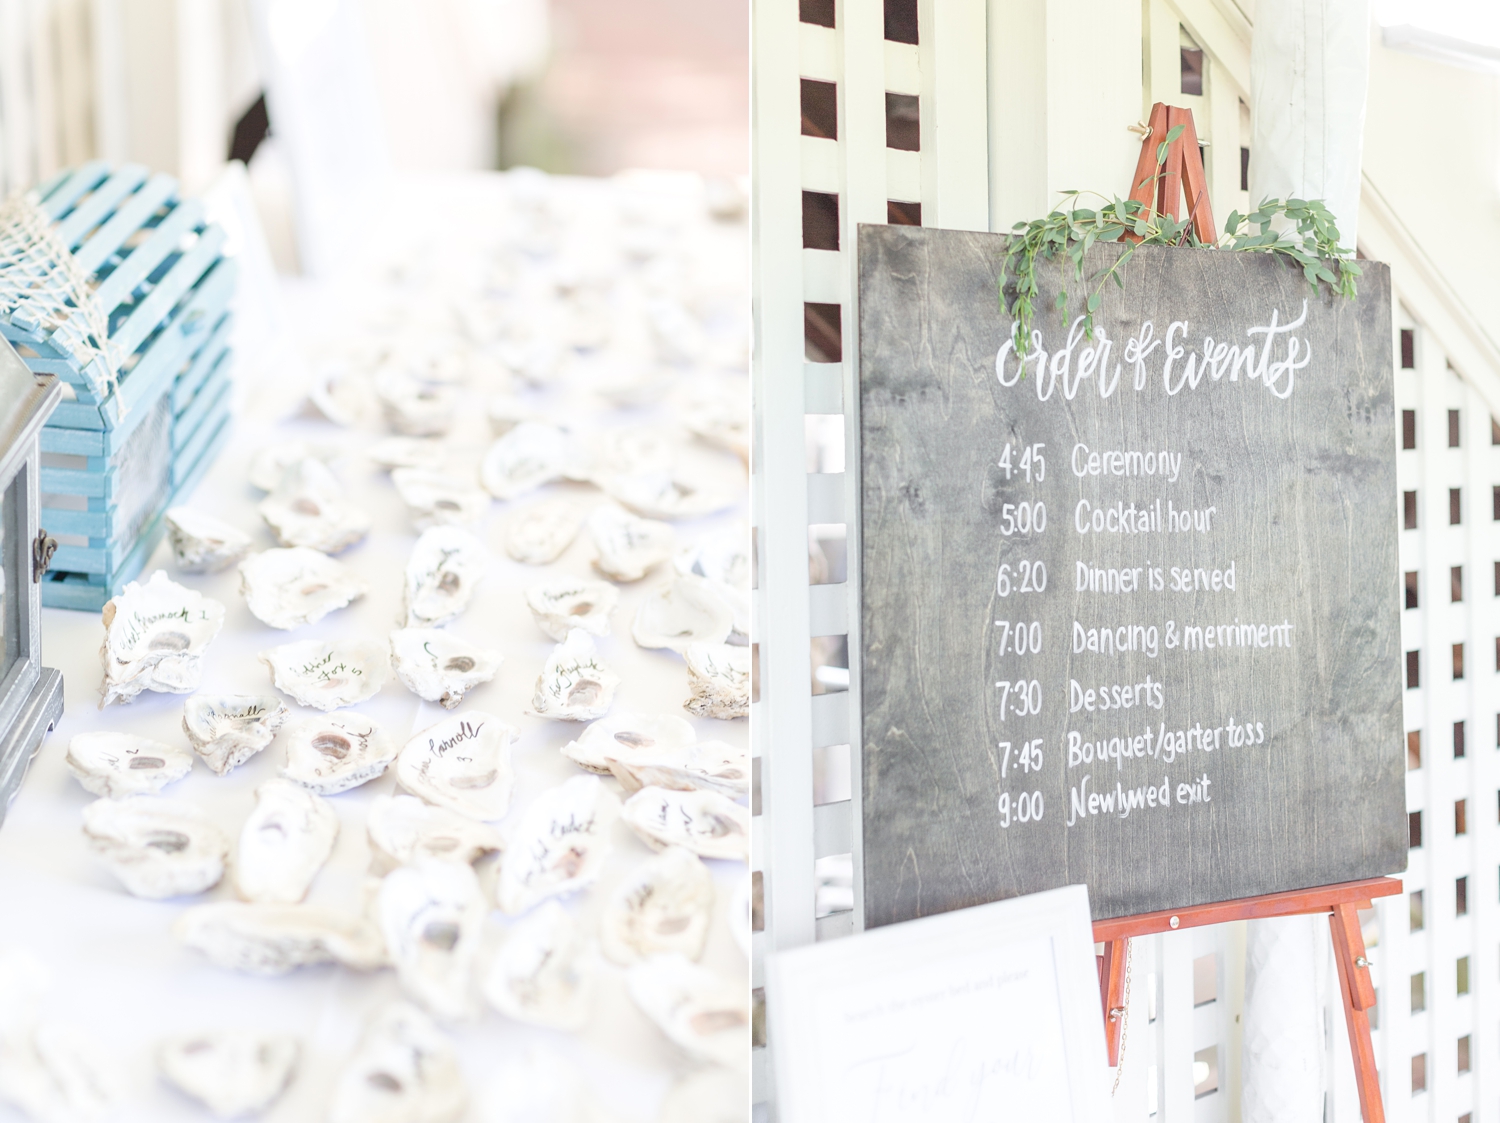  Love this idea with the oysters place cards! So creative.  